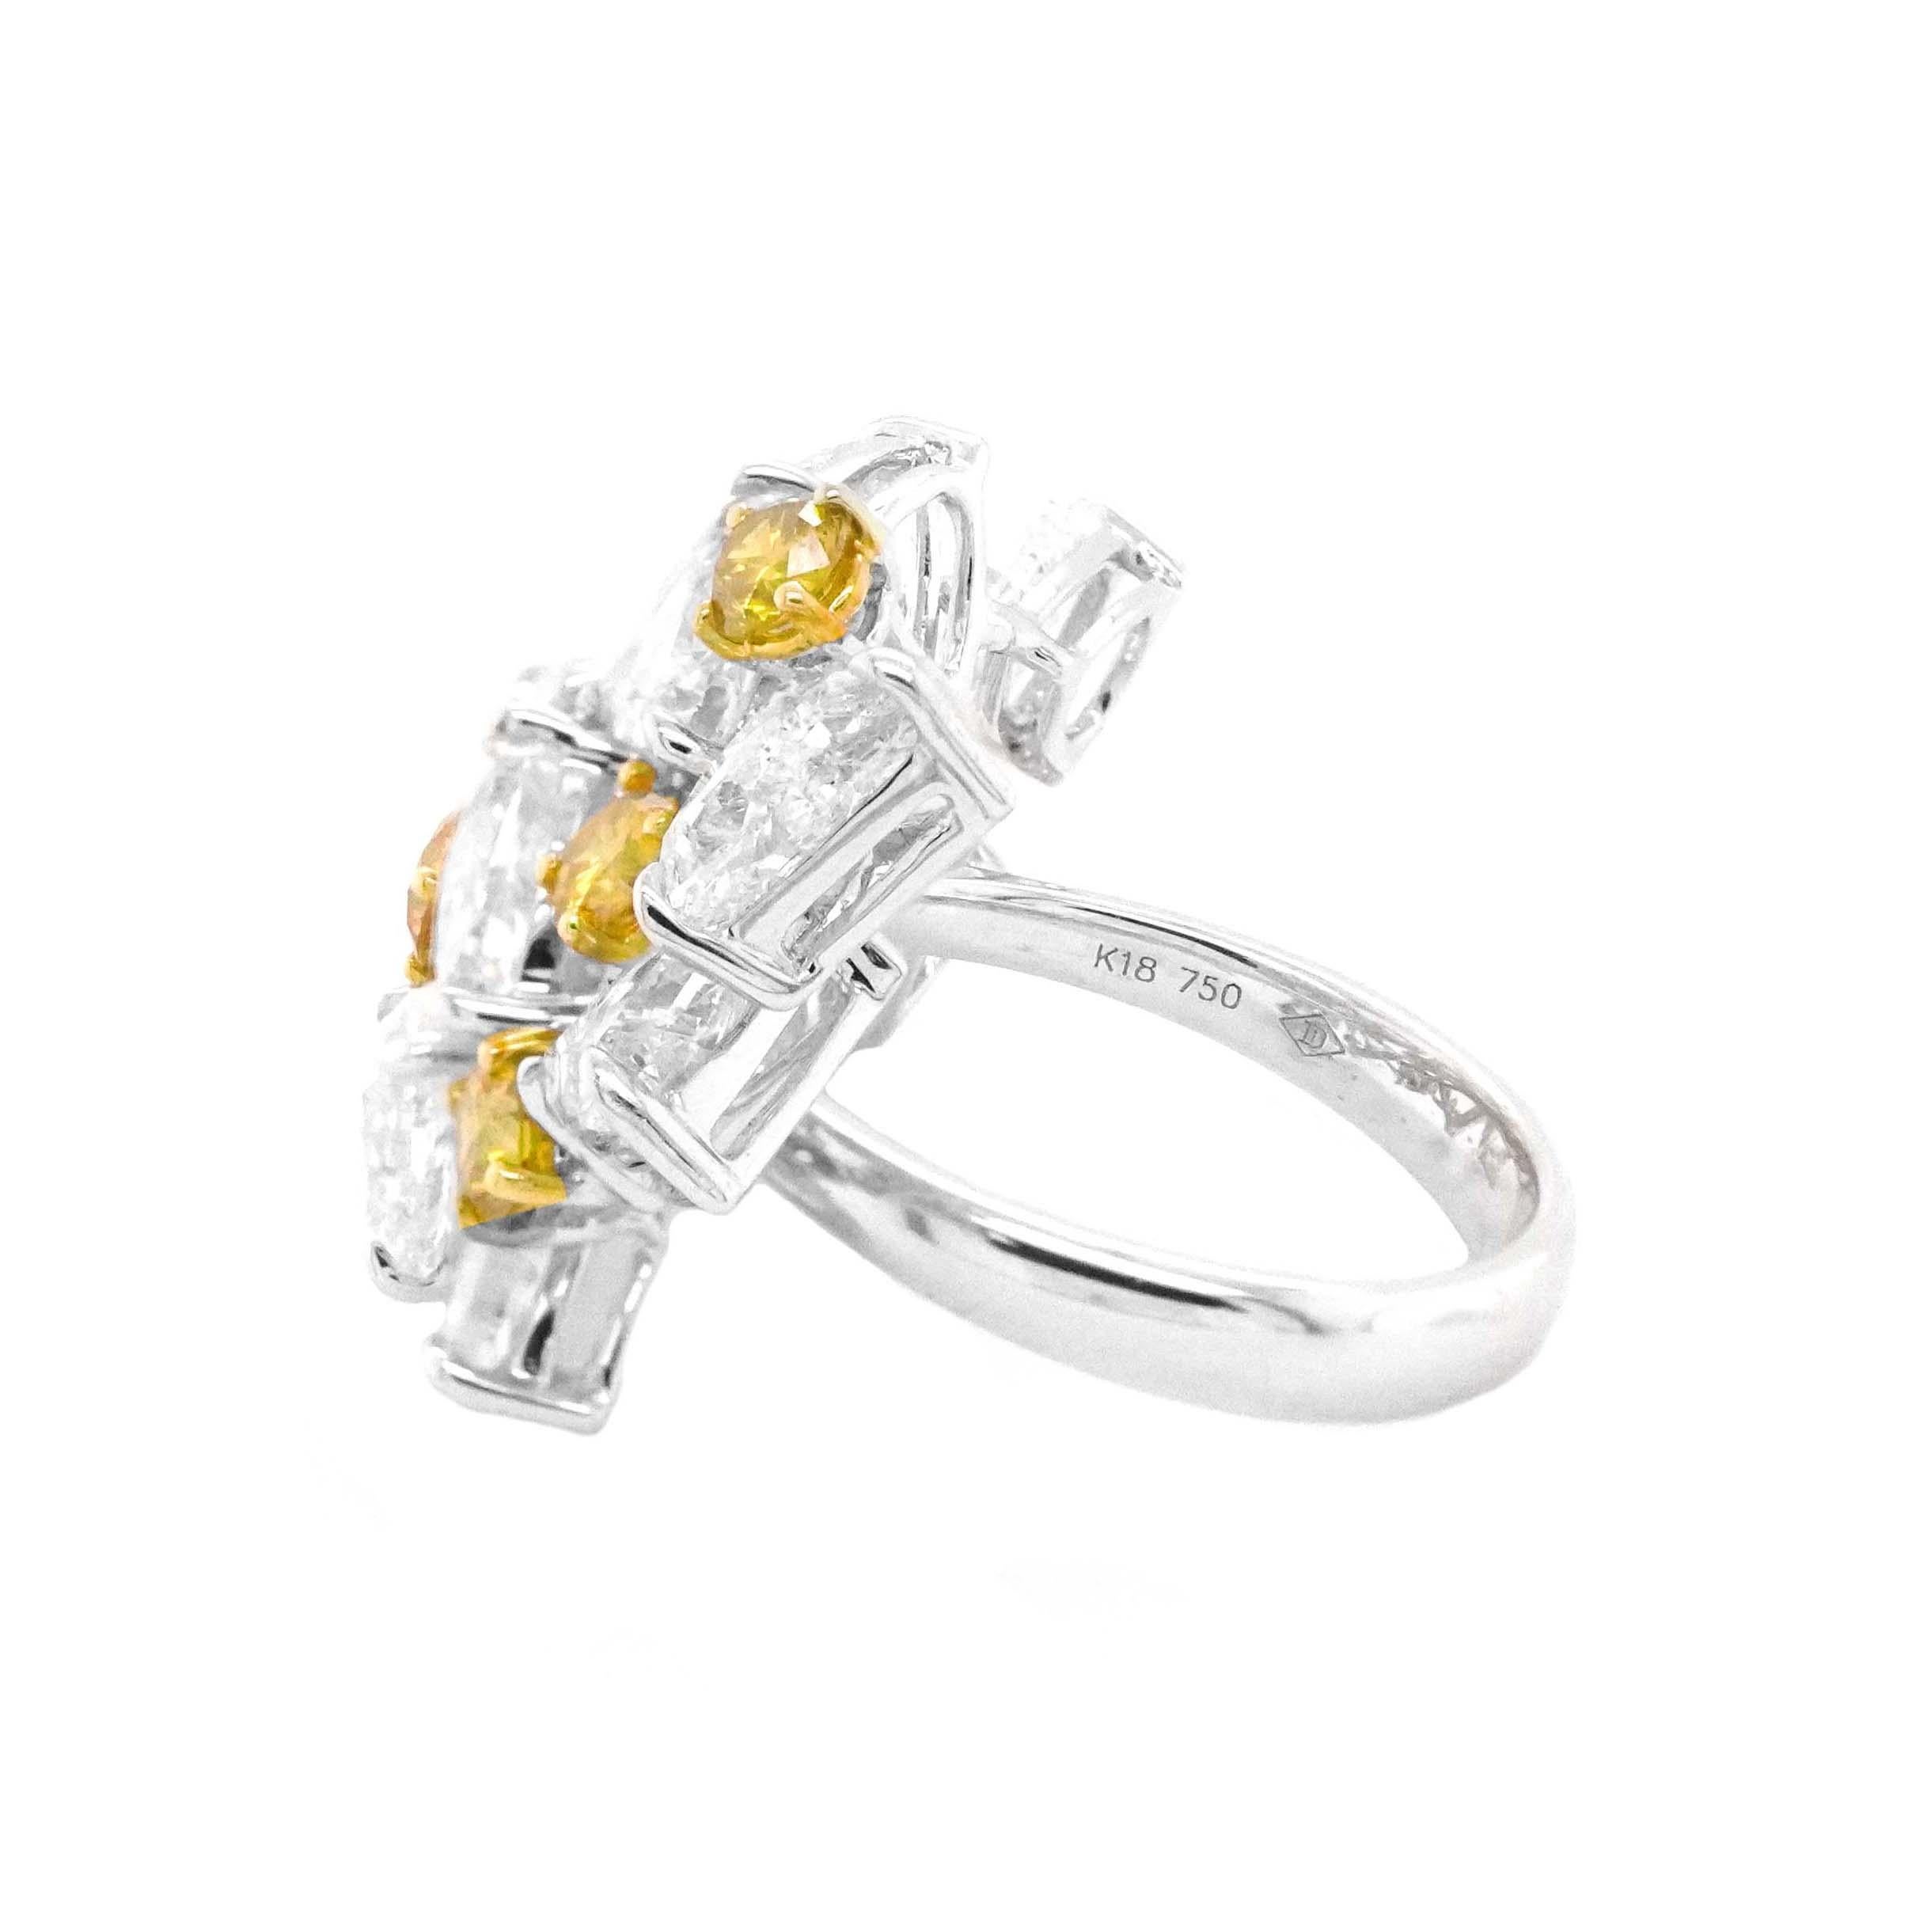 Round Cut 8.79 Carat D Color White Diamond and 1.23 Carat Vivid Yellow Collectors Ring For Sale